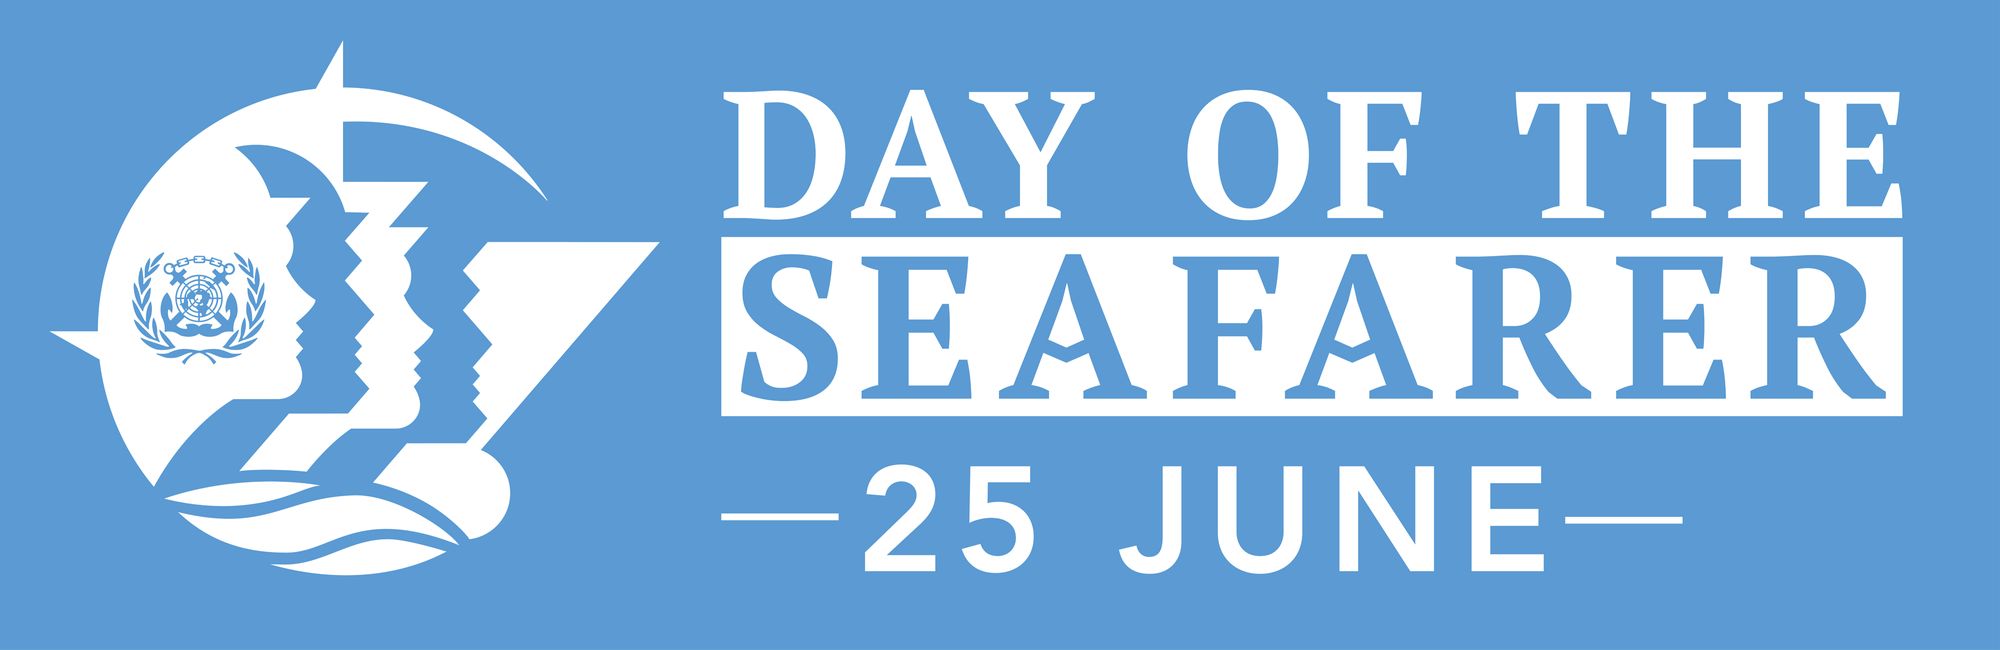 Day of the Seafarer logo